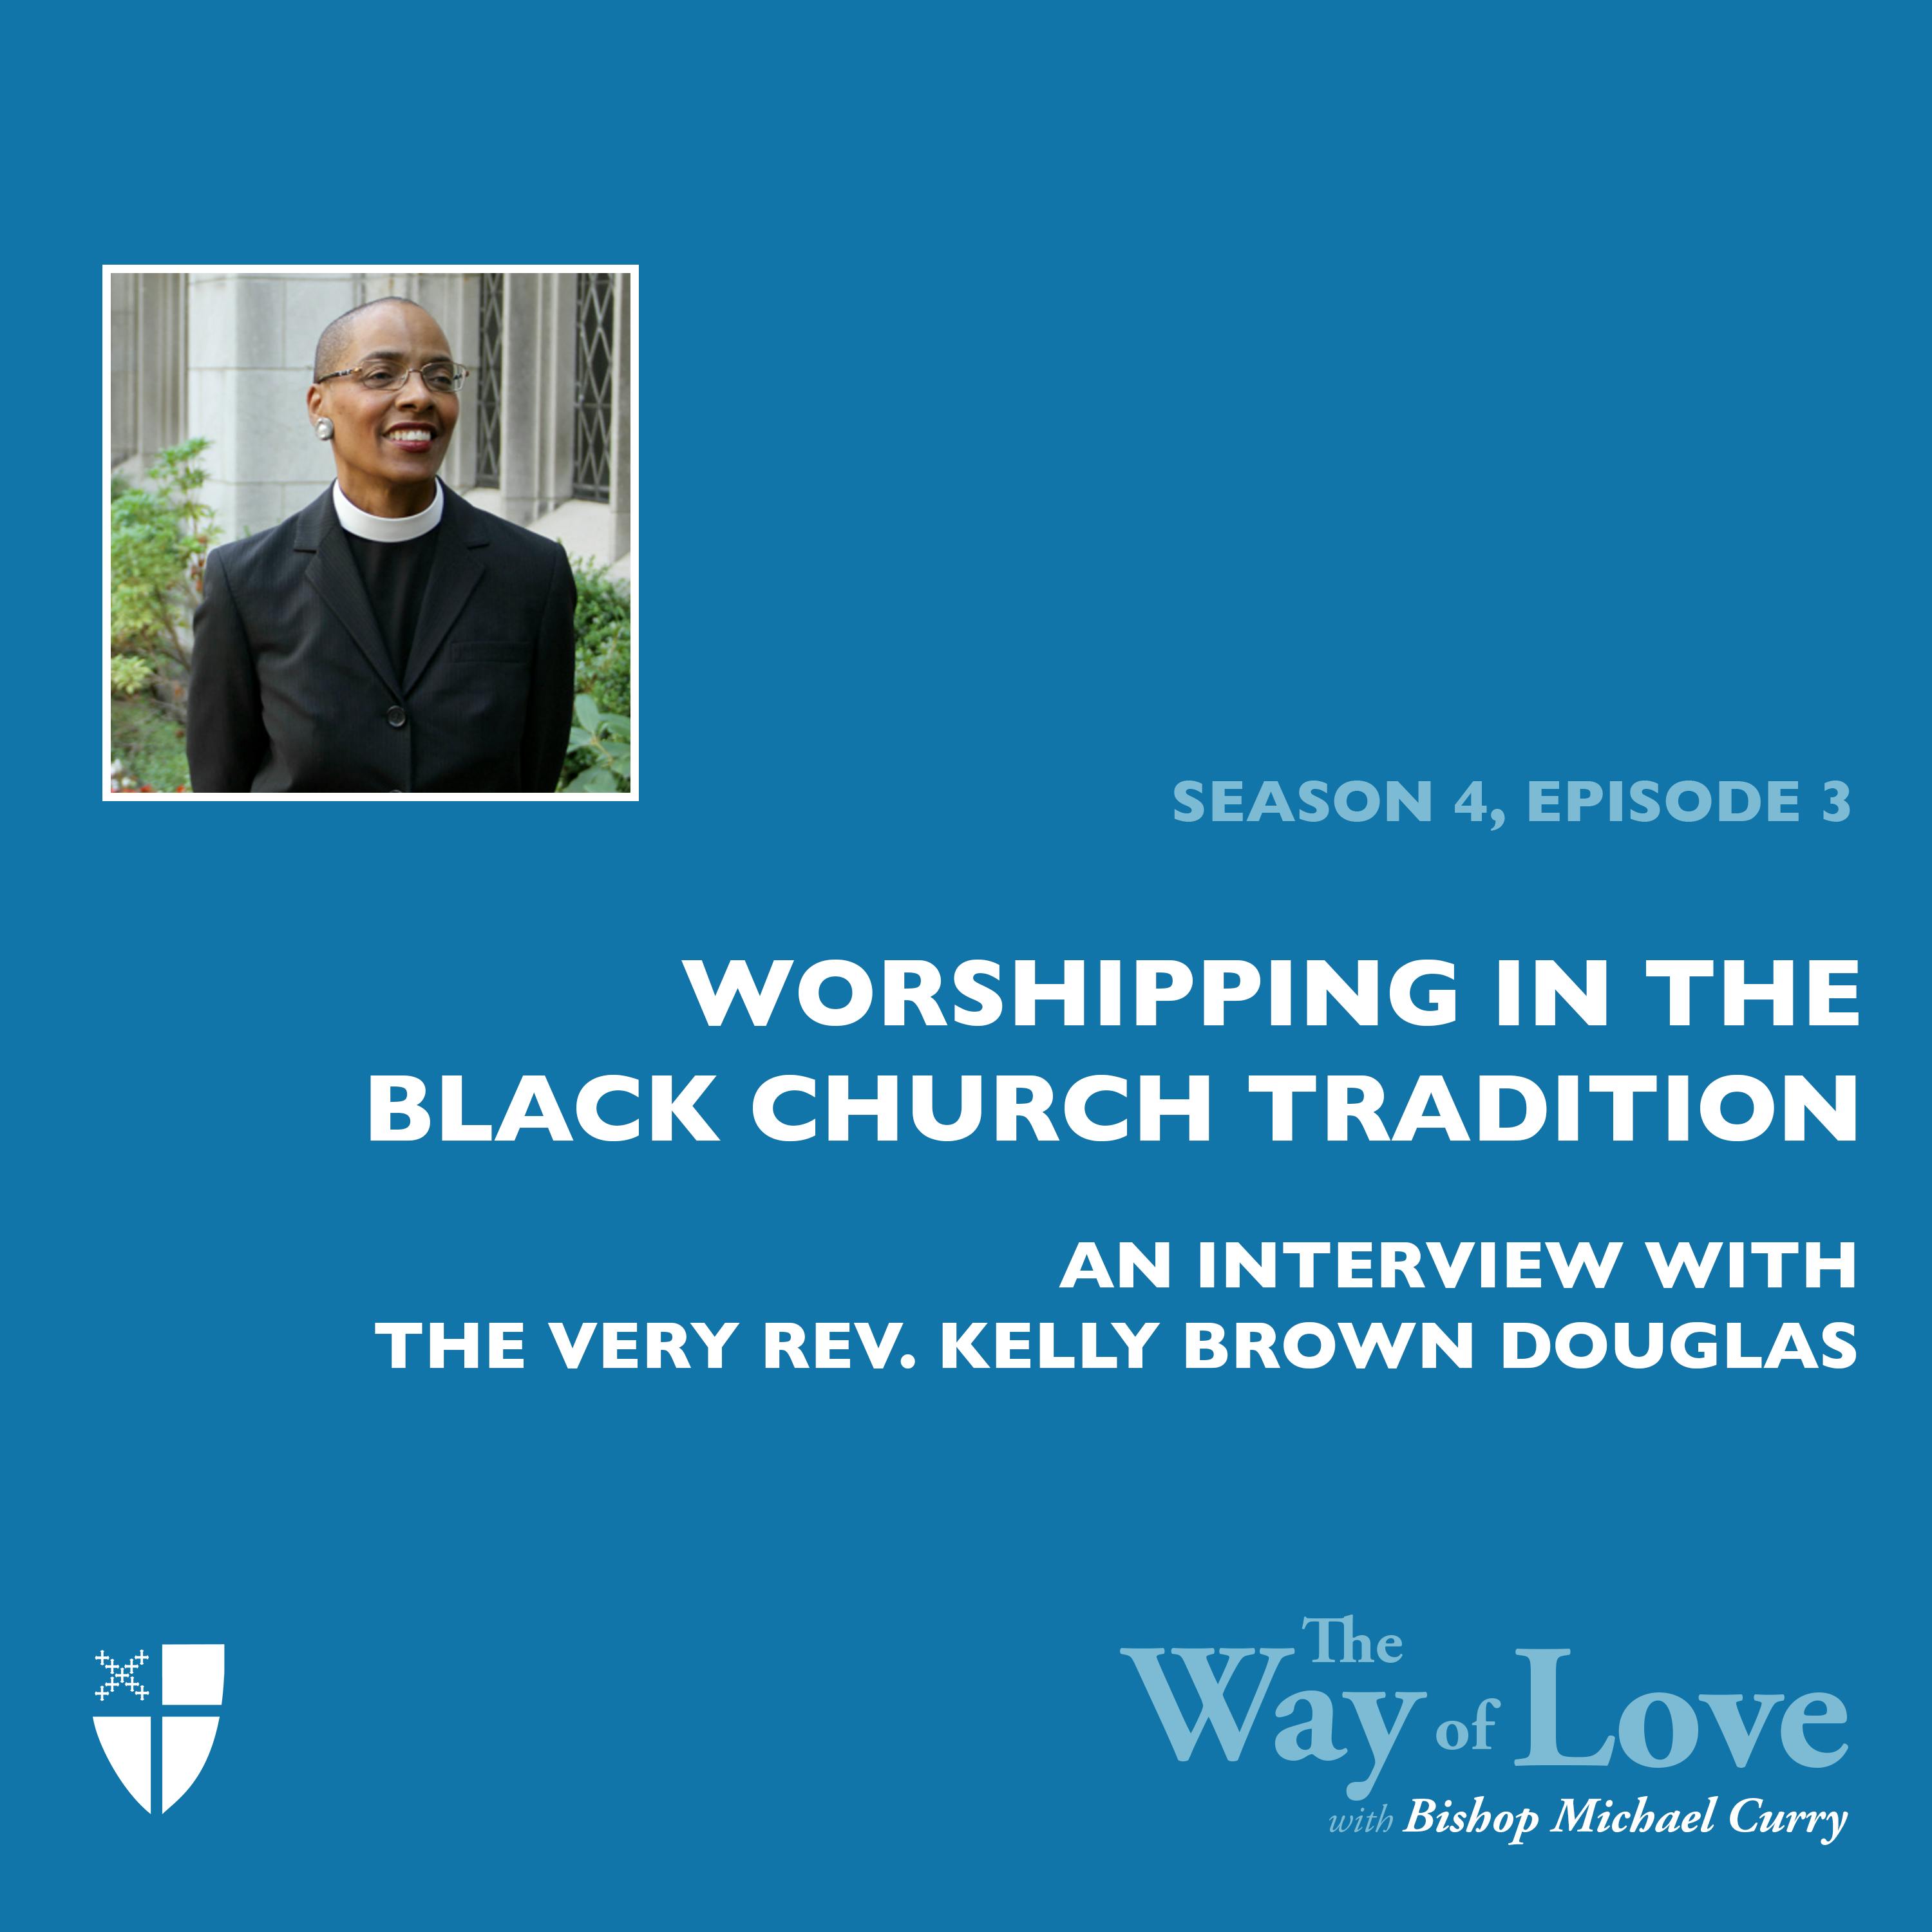 Worshipping in the Black Church Tradition with Dean Kelly Brown Douglas